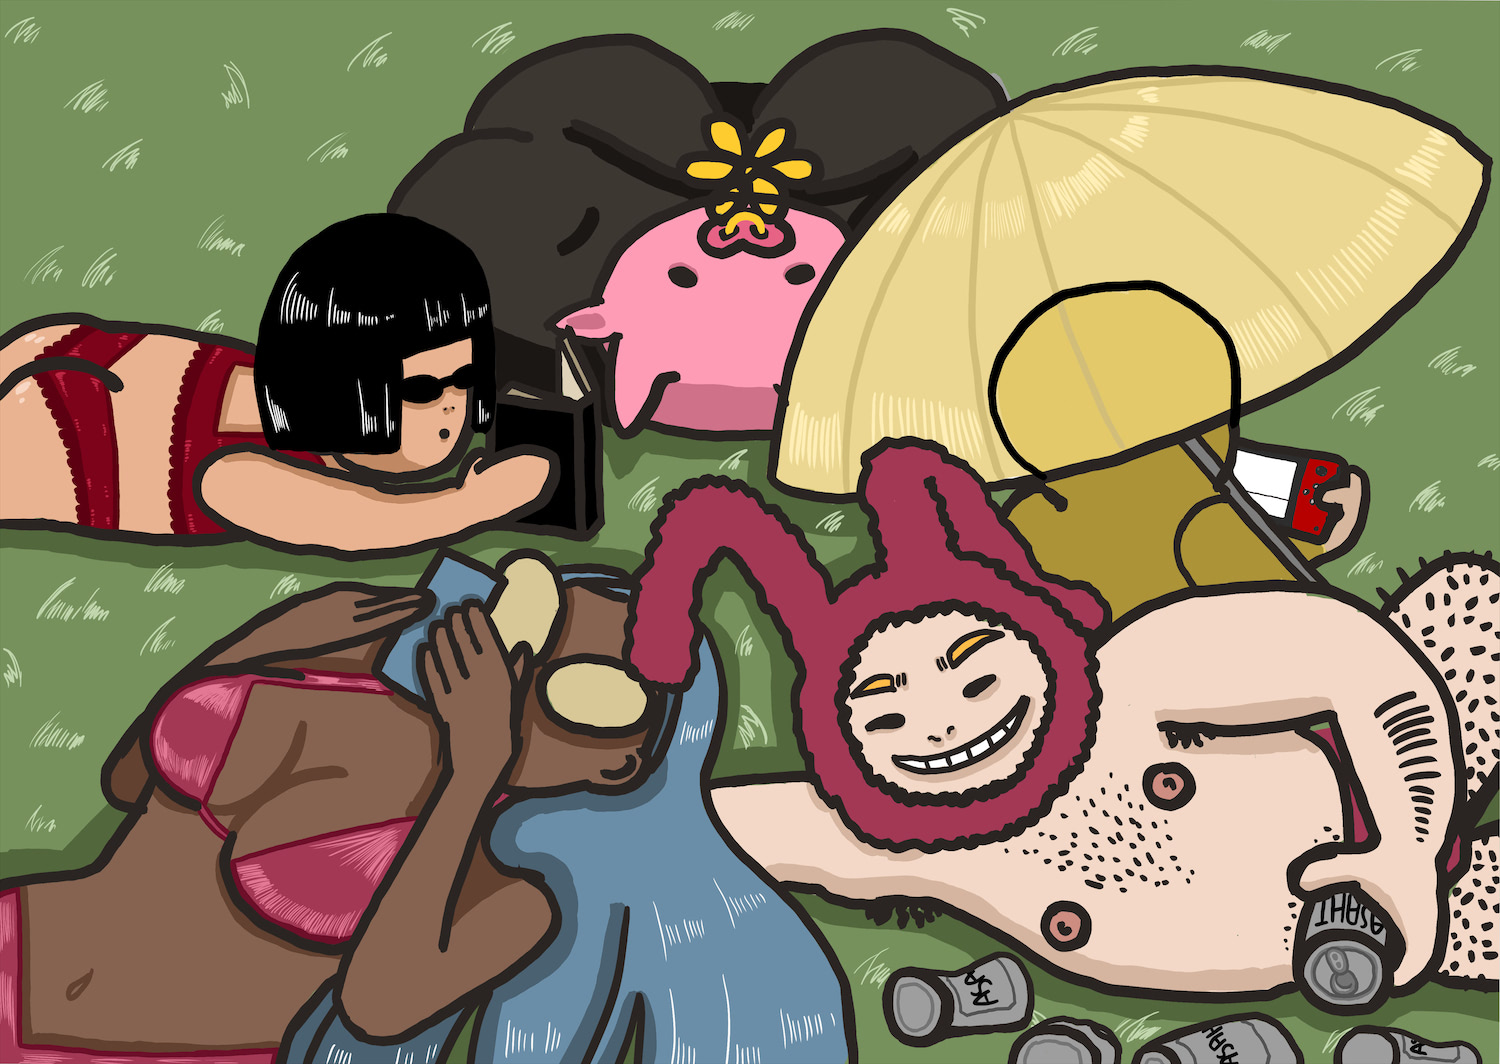 This is an illustration of Pinkman and his roommates on weekends. They like to take a rest in the backyard of their house. The image expresses their significant difference in personality. Giselle cannot get off her phone, Pinkman is an alcoholic, Aiden is peacefully smelling his flower, Delight is reading the bible, and Miki Moore just can't stand the sunlight and the real world.